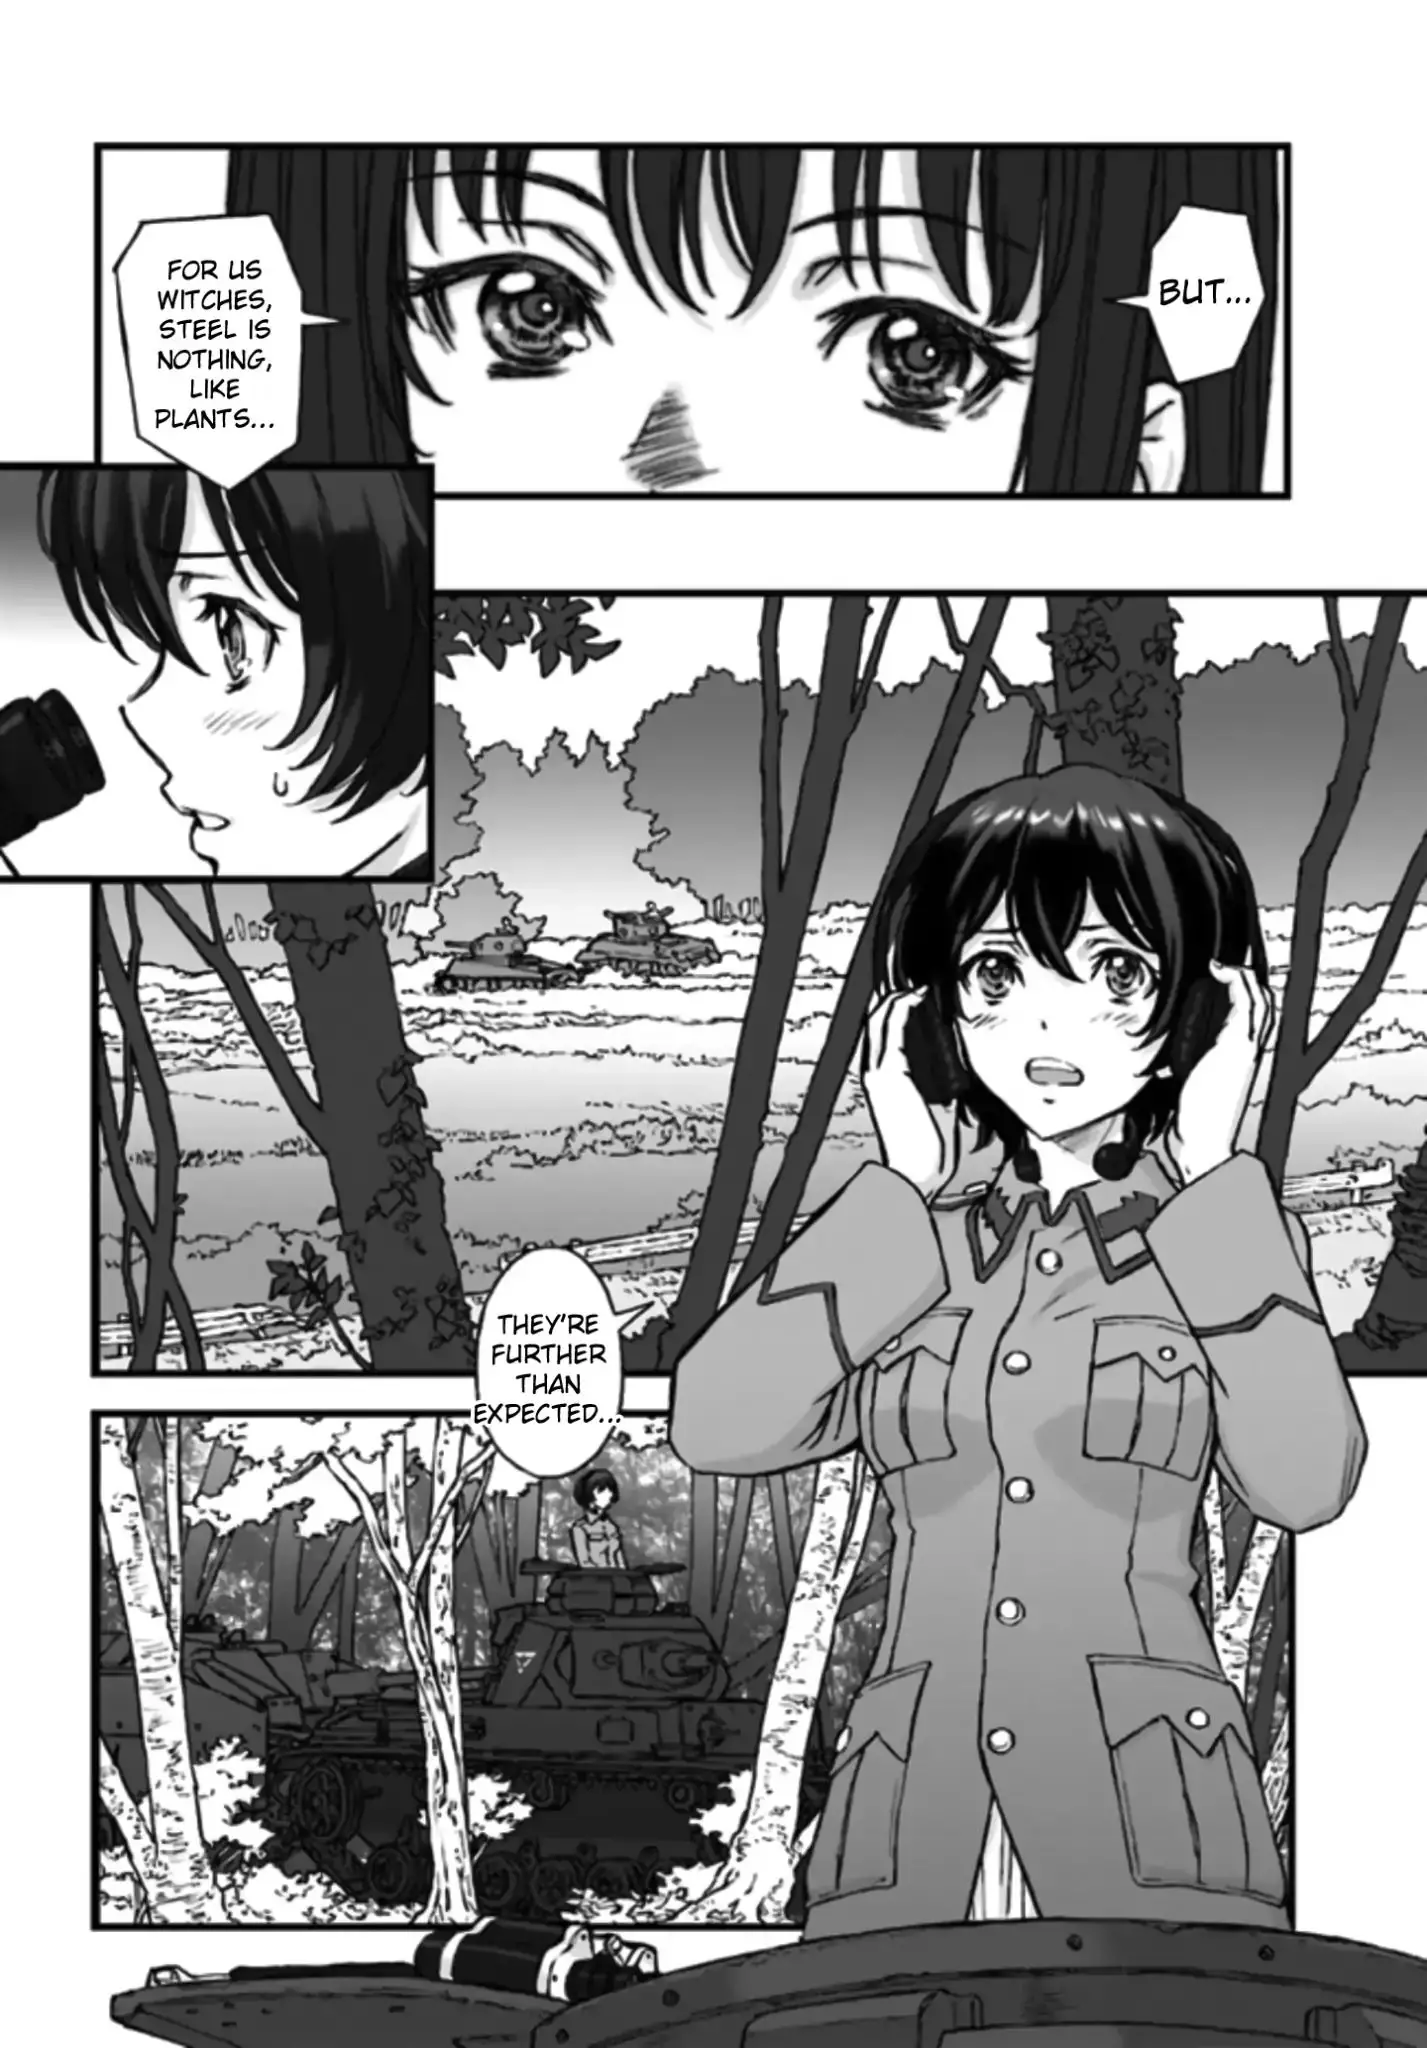 Girls Und Panzer - The Fir Tree And The Iron-Winged Witch - 1 page 9